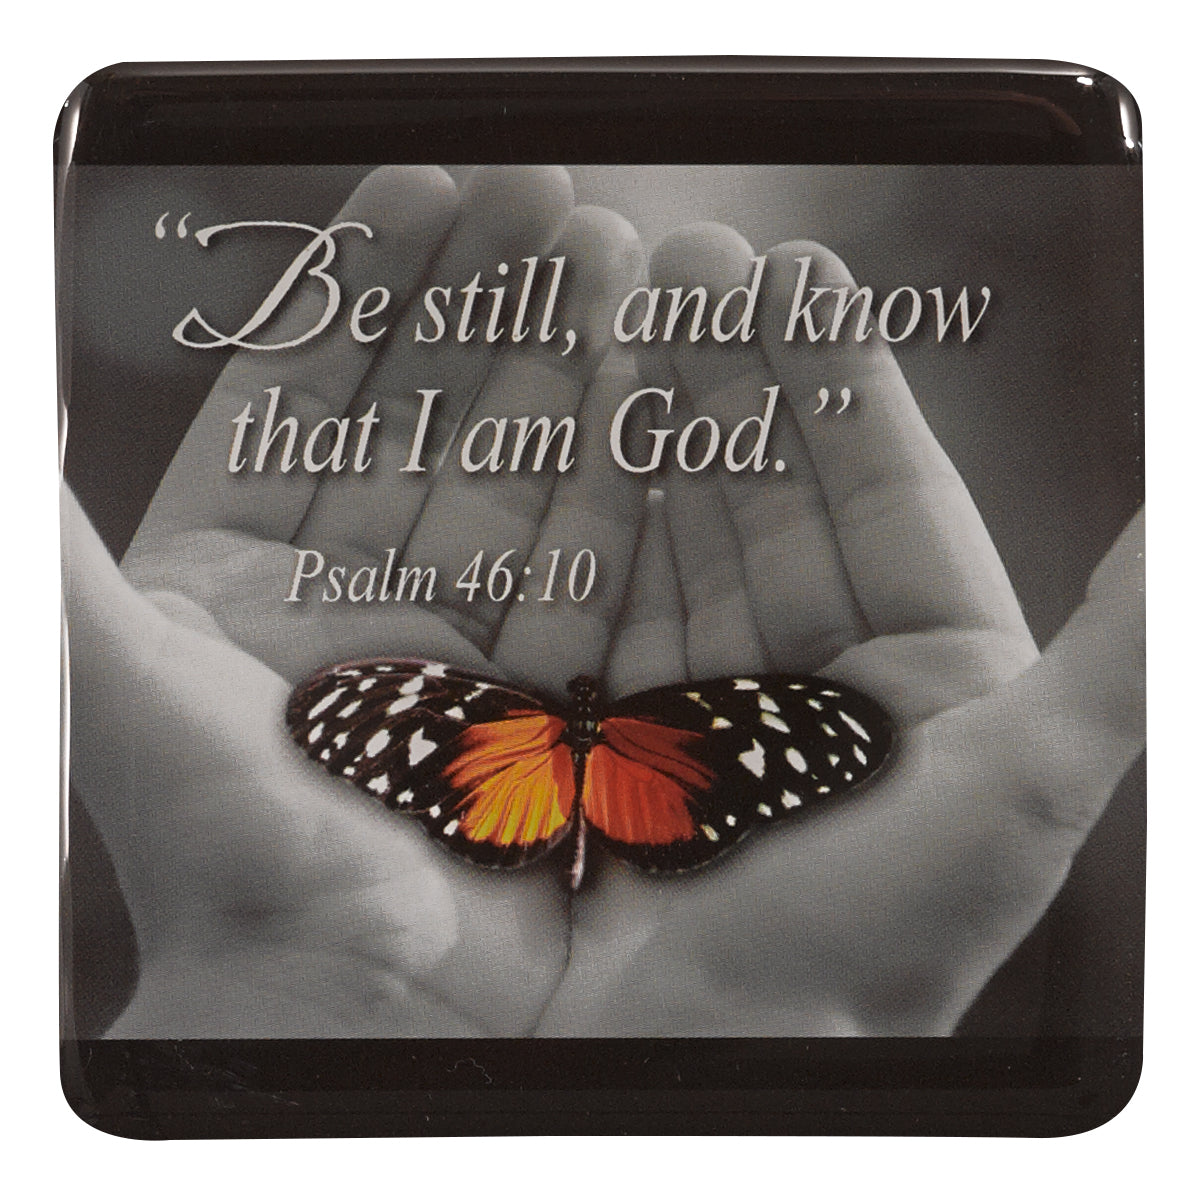 Image of Be Still with Butterfly Magnet - Psalm 46:10 other